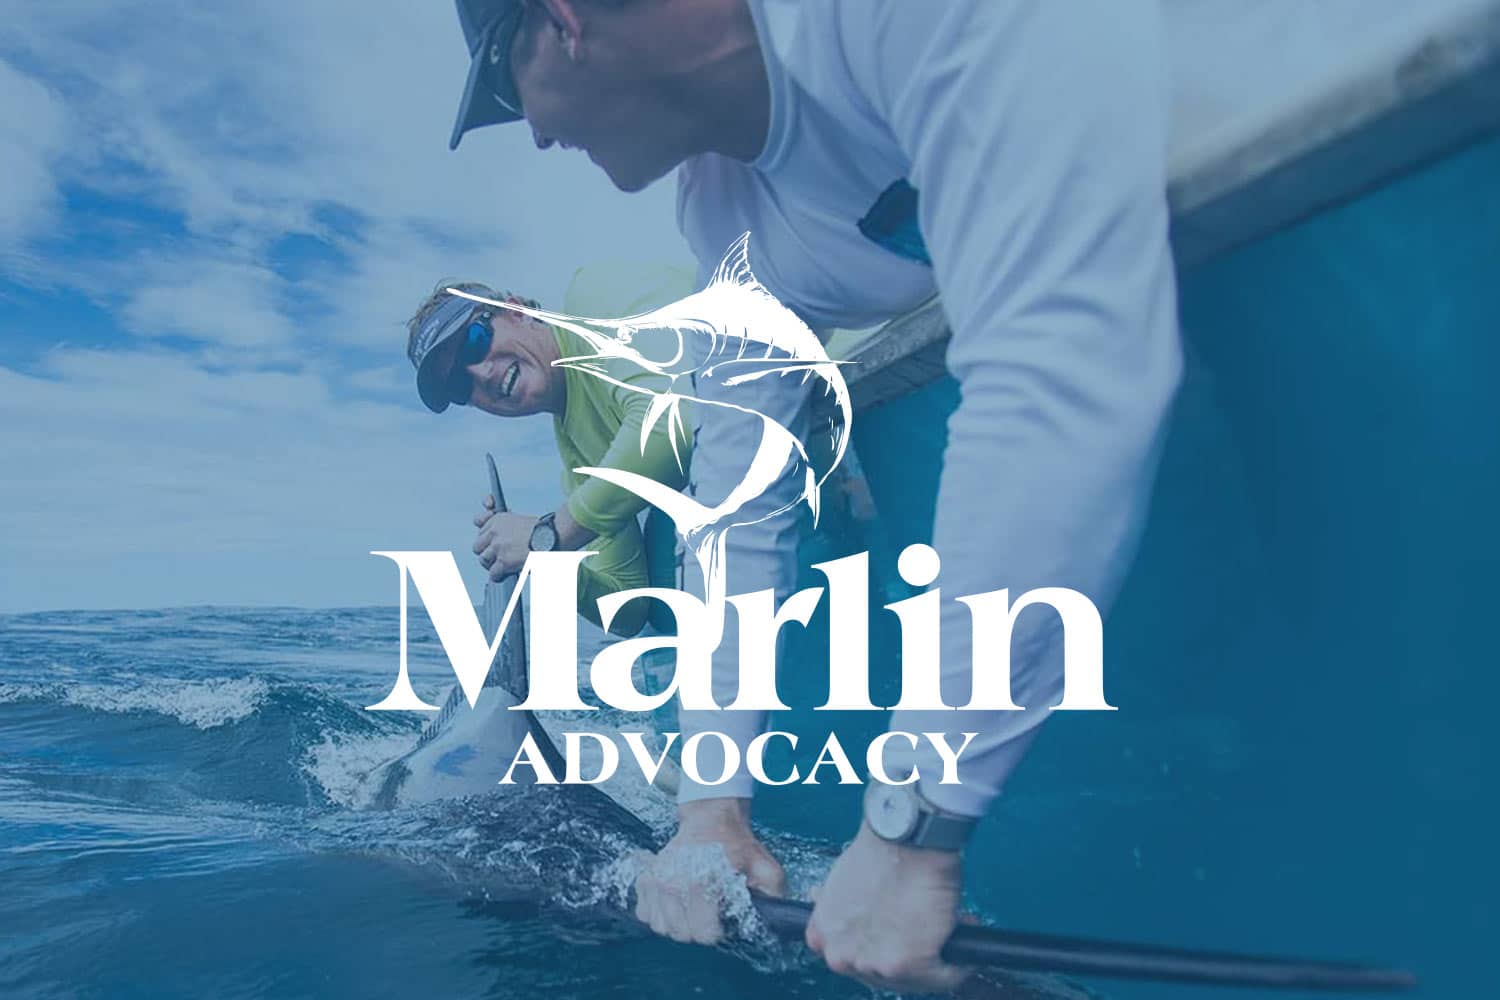 Marlin Advocacy logo in white overlaid a blue-filter image of two anglers pulling a marlin boatside.